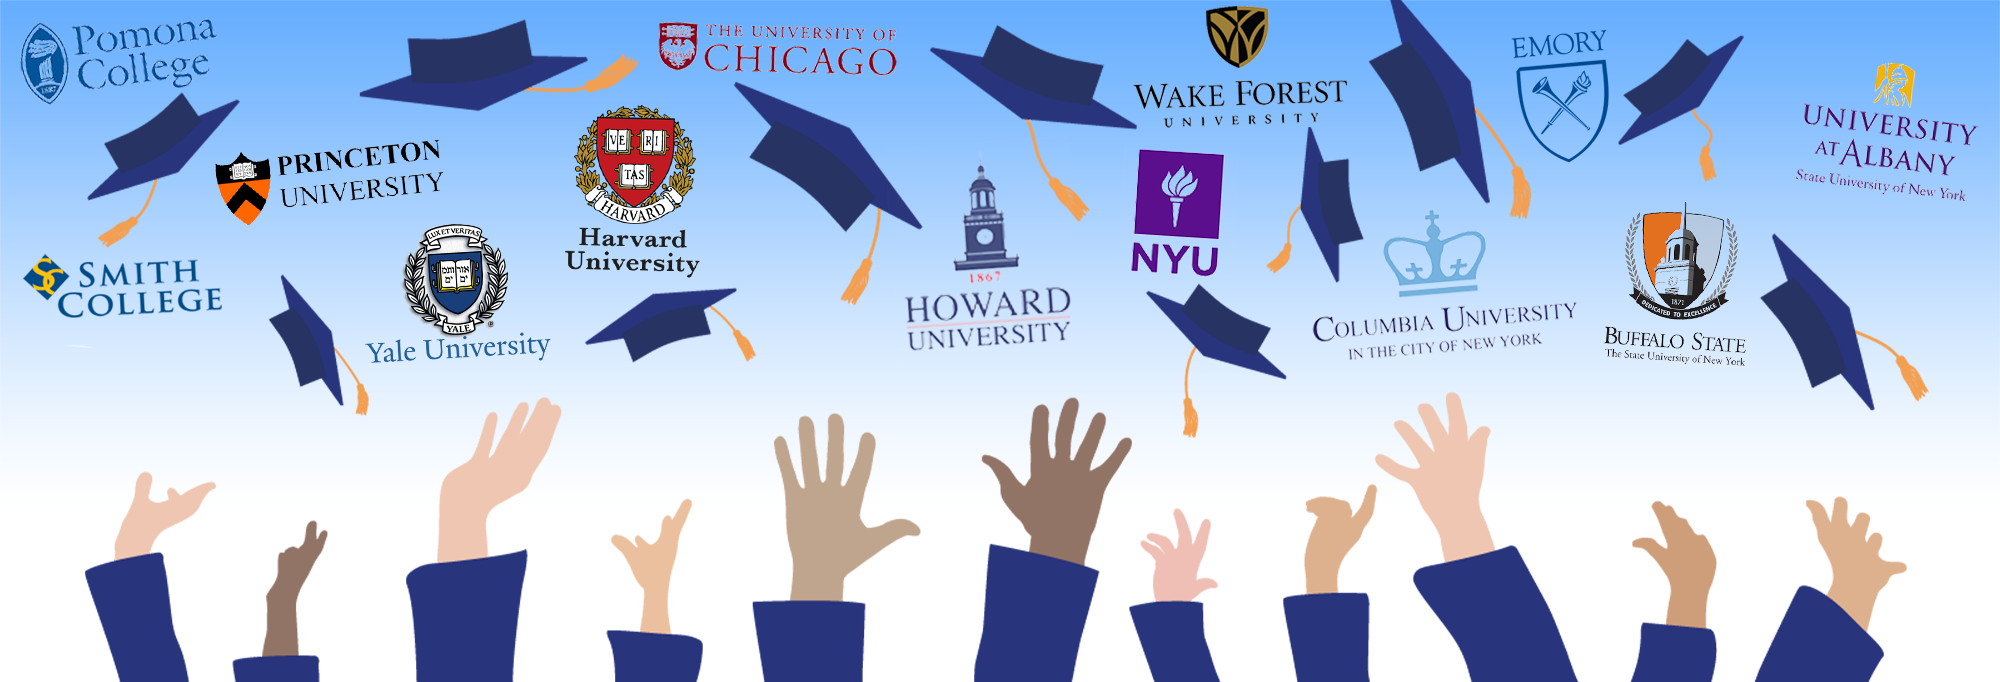 Digital art of hands tossing graduation caps into a sky full of various college crests